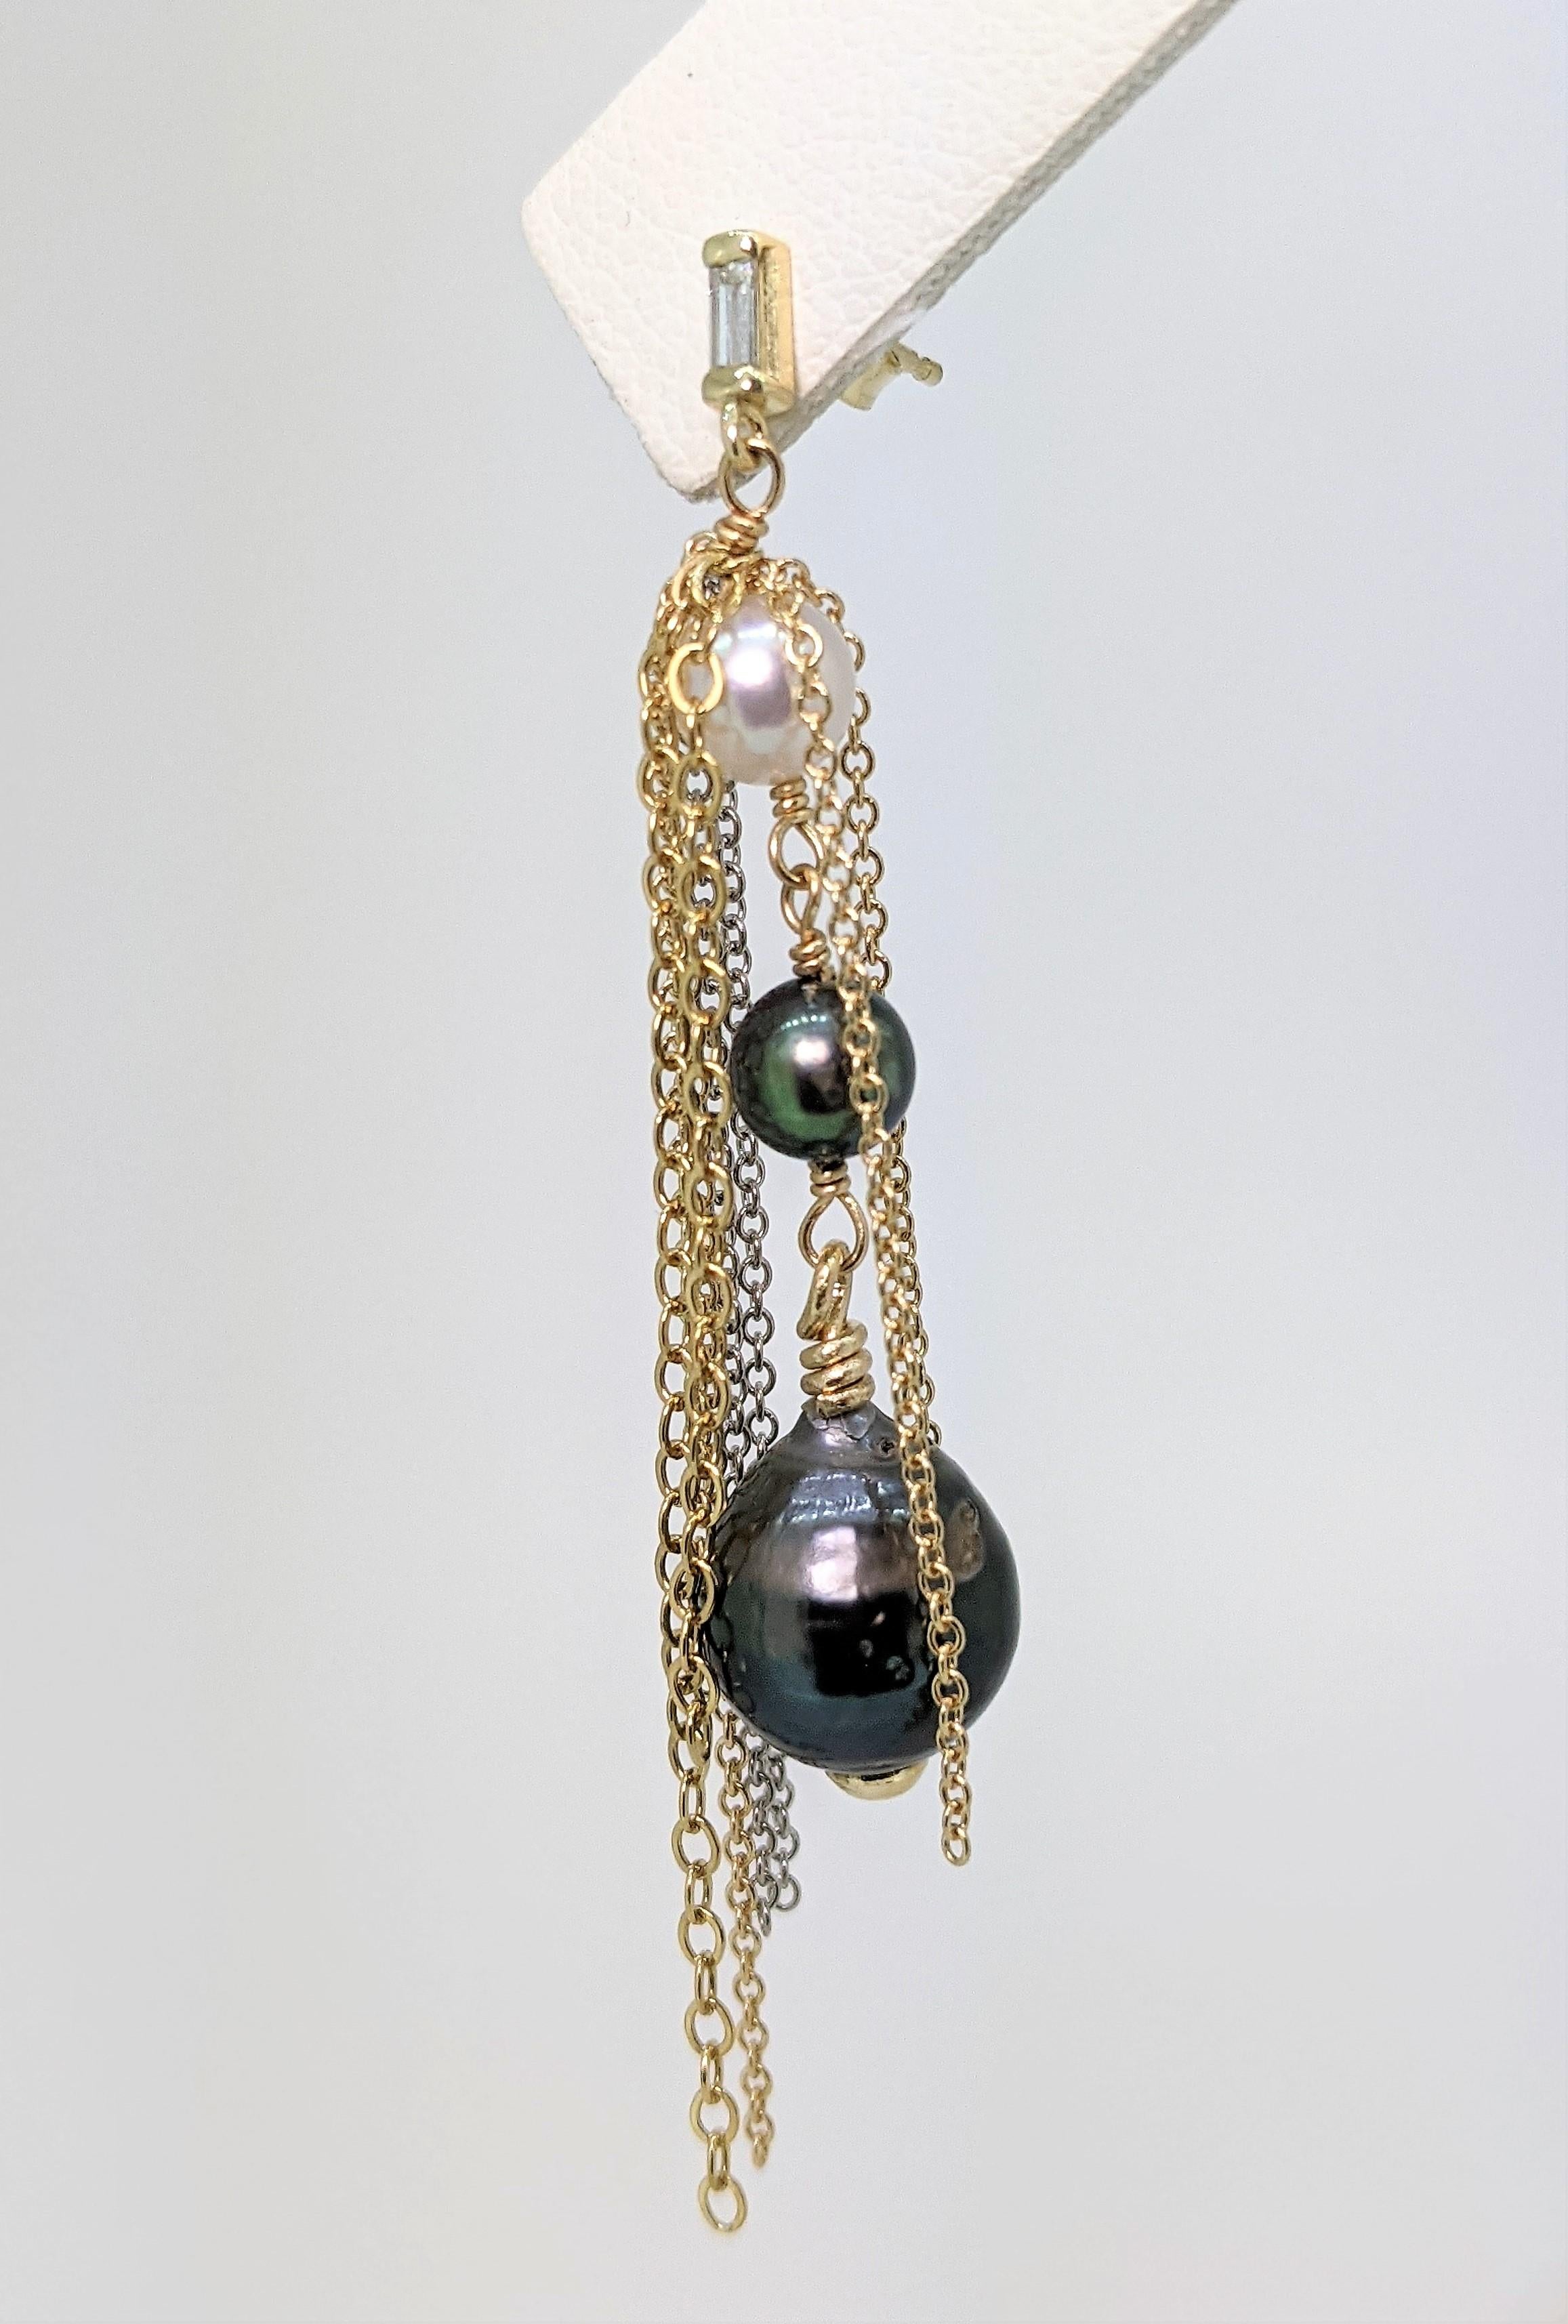 Baguette Cut Pearl Comet Earrings in 14ky with Diamond Baguette and Gold and Silver Chains